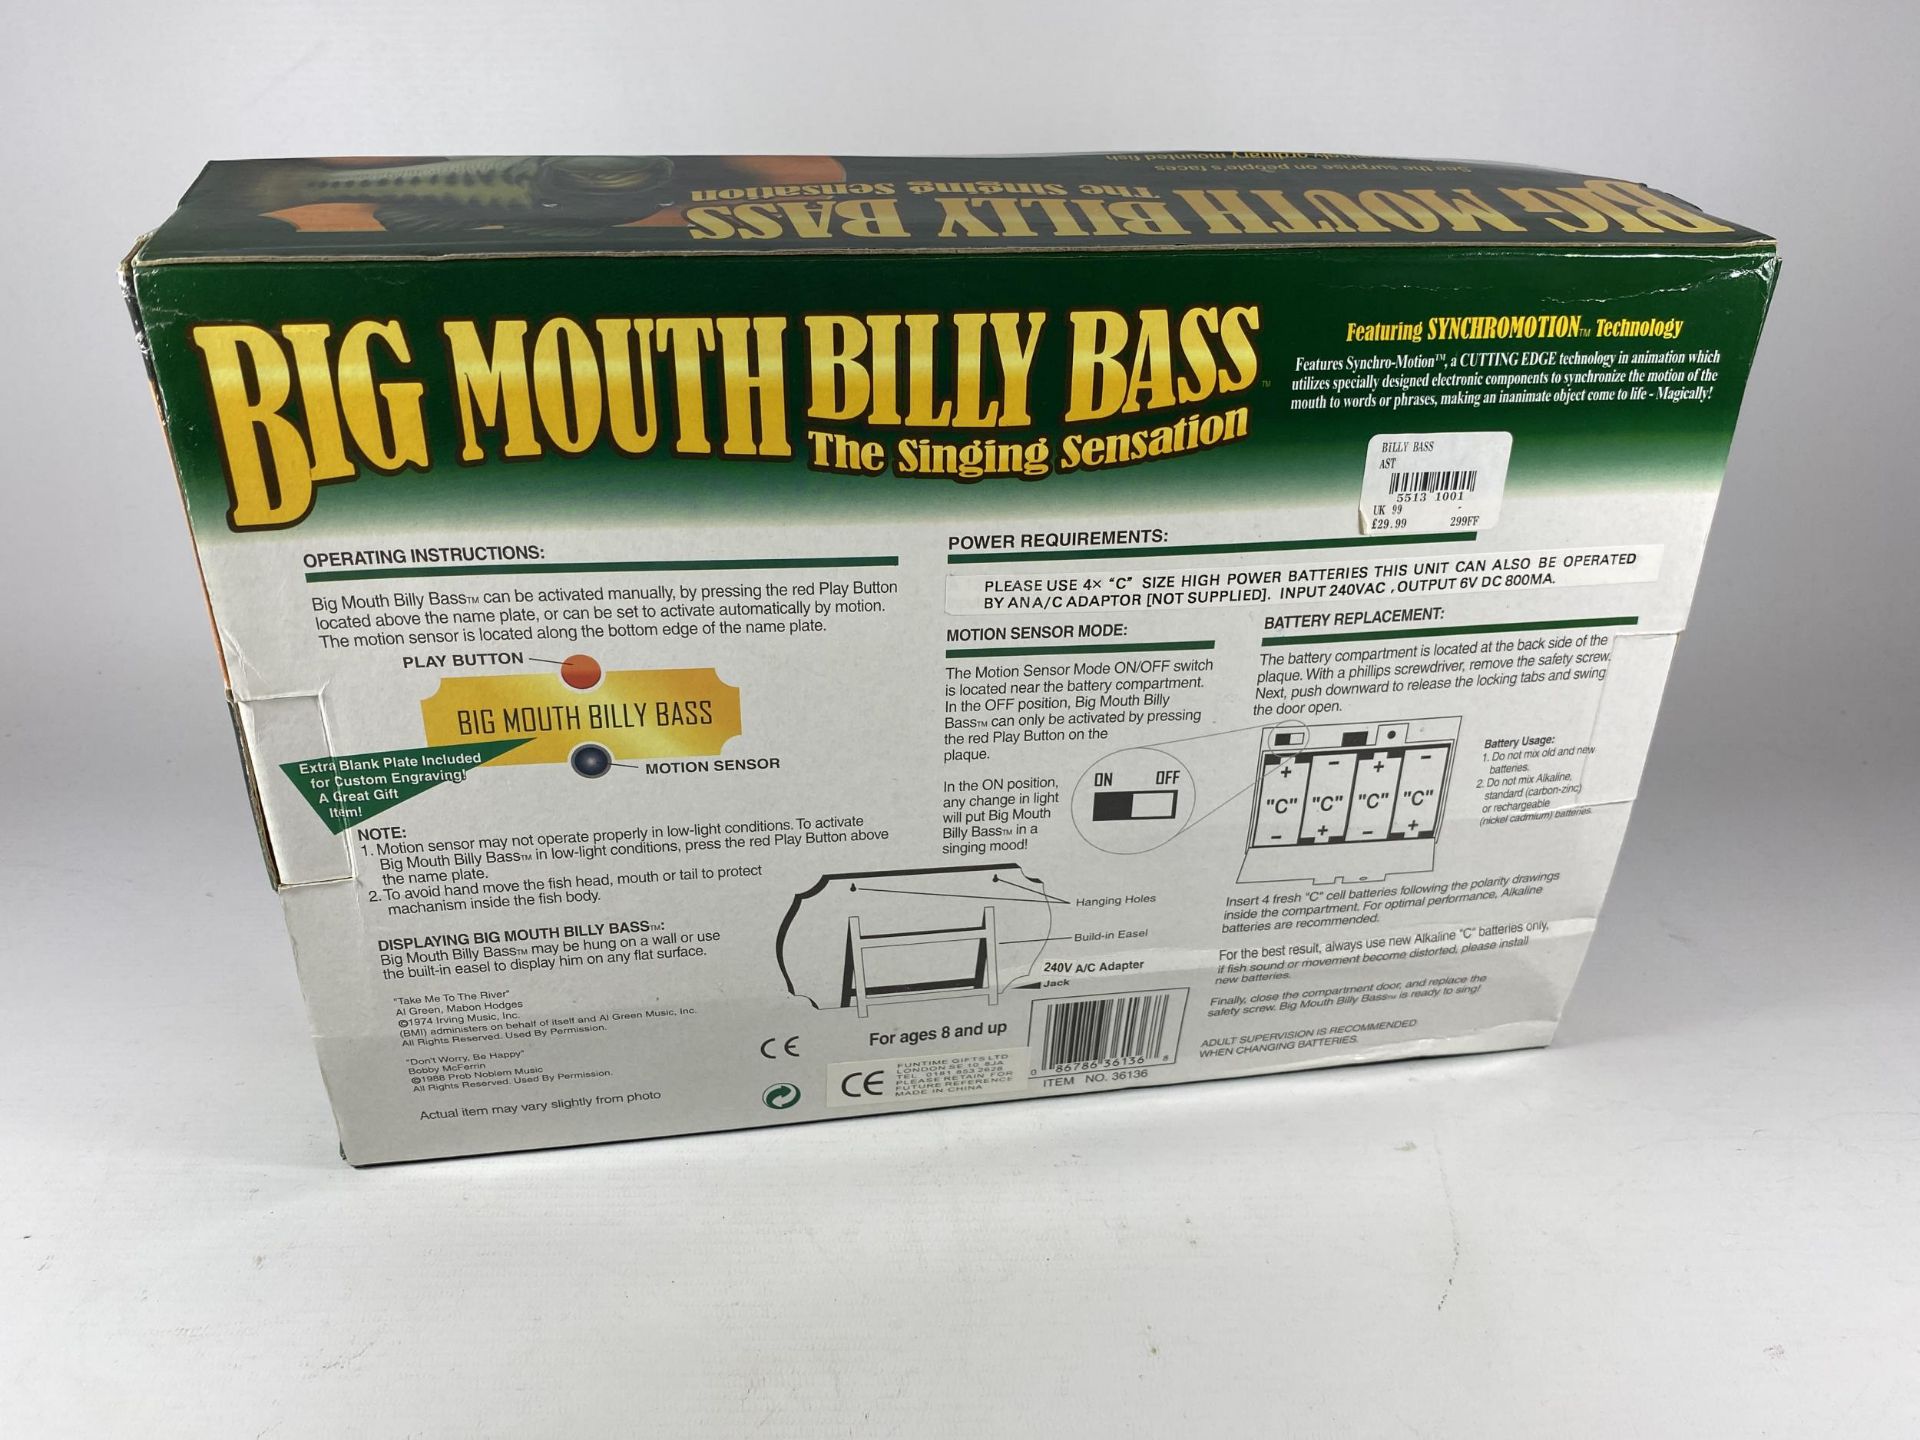 A BOXED RETRO BIG MOUTH BILLY BASS THE SINGING SENSATION - Image 2 of 3